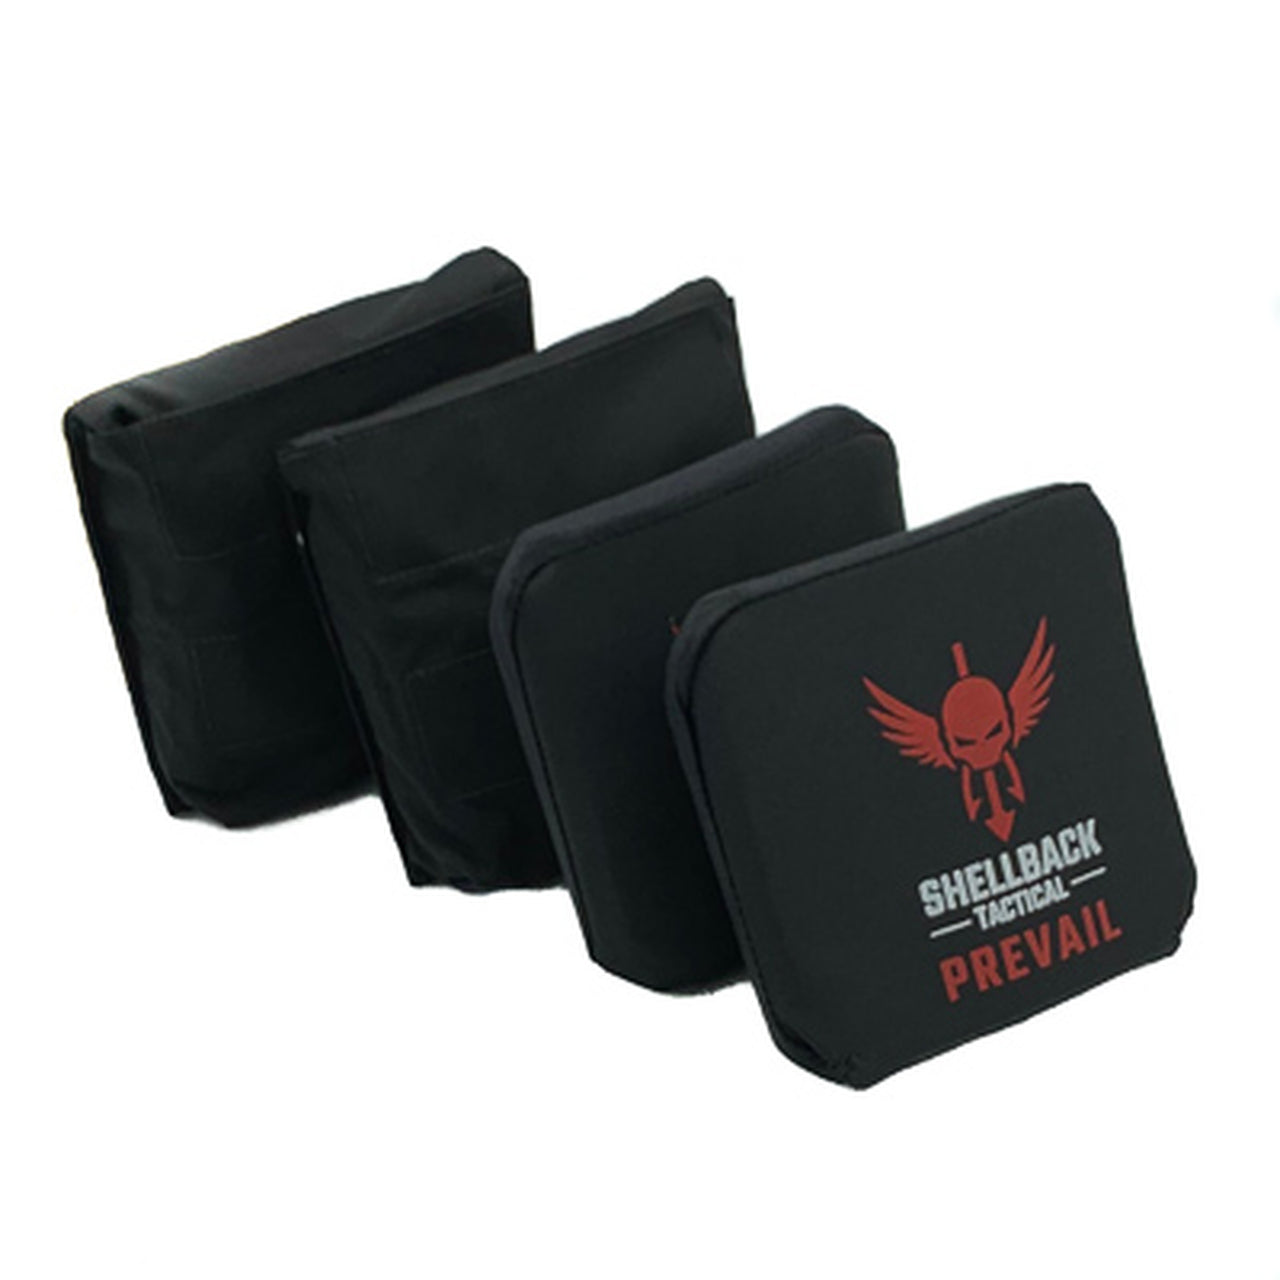 Three Shellback Tactical Side Armor Plate Kits with Level IV Model 1155SP Armor Plates.